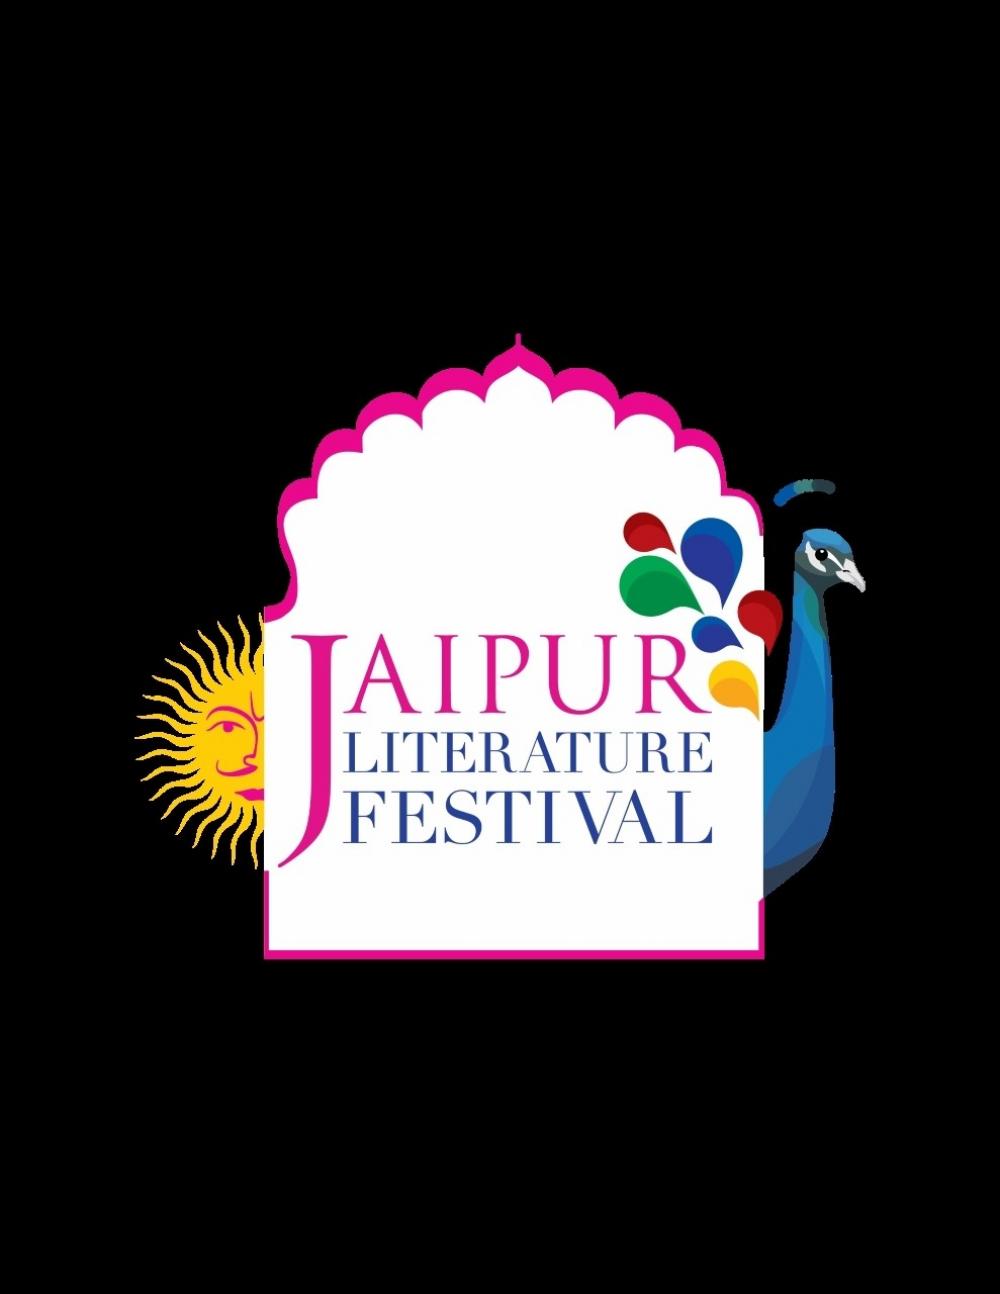 Teamwork Arts reschedules the 15th Jaipur Literature Festival to March 5th to 14th 2022